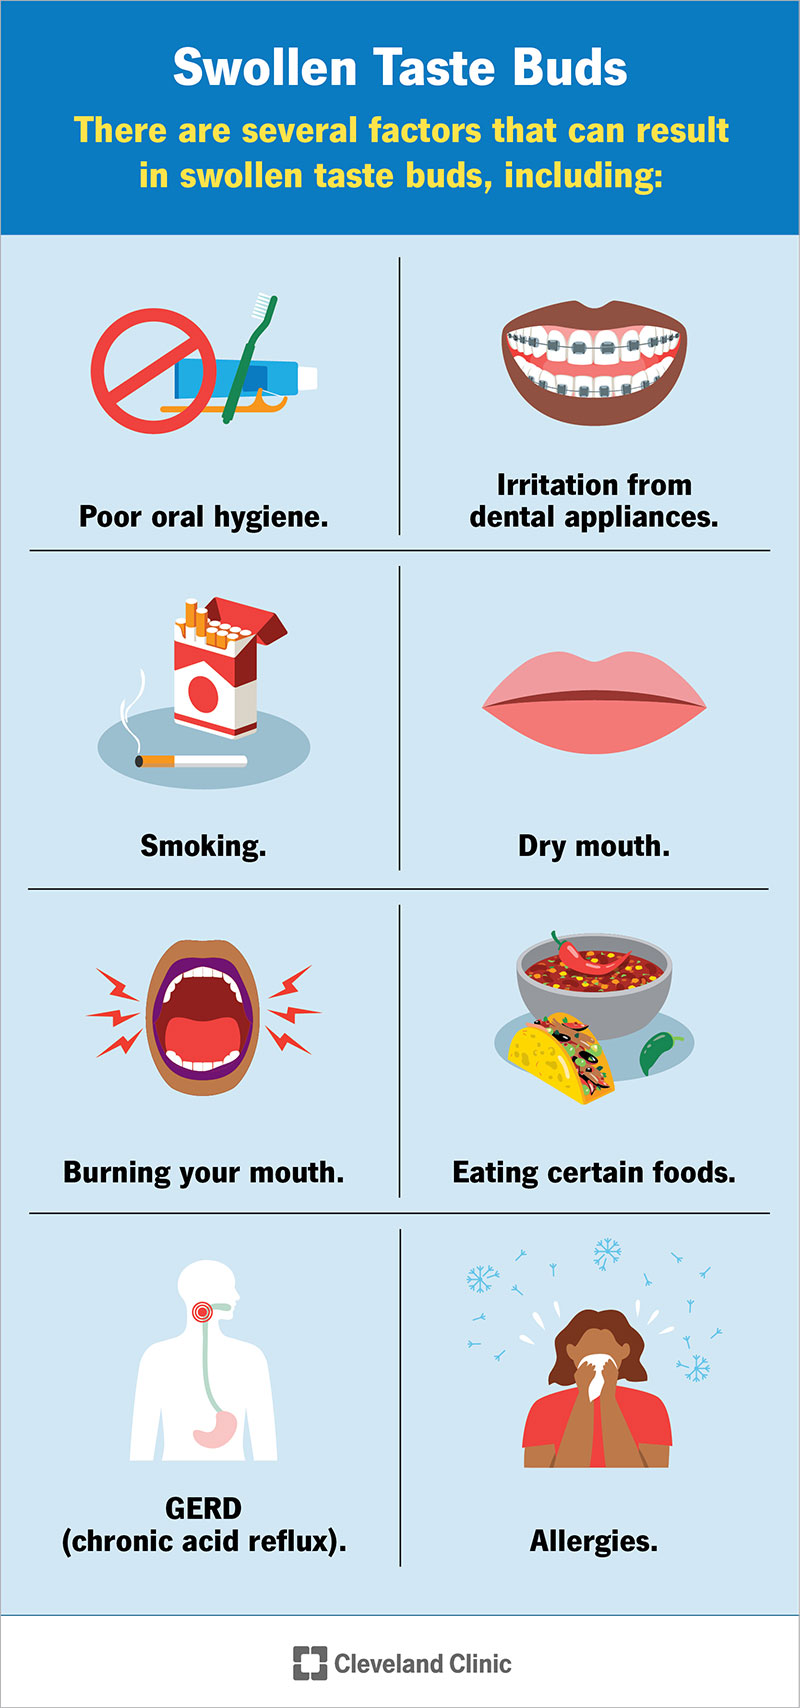 Swollen taste bud risk factors, including poor oral hygiene, smoking and dry mouth.